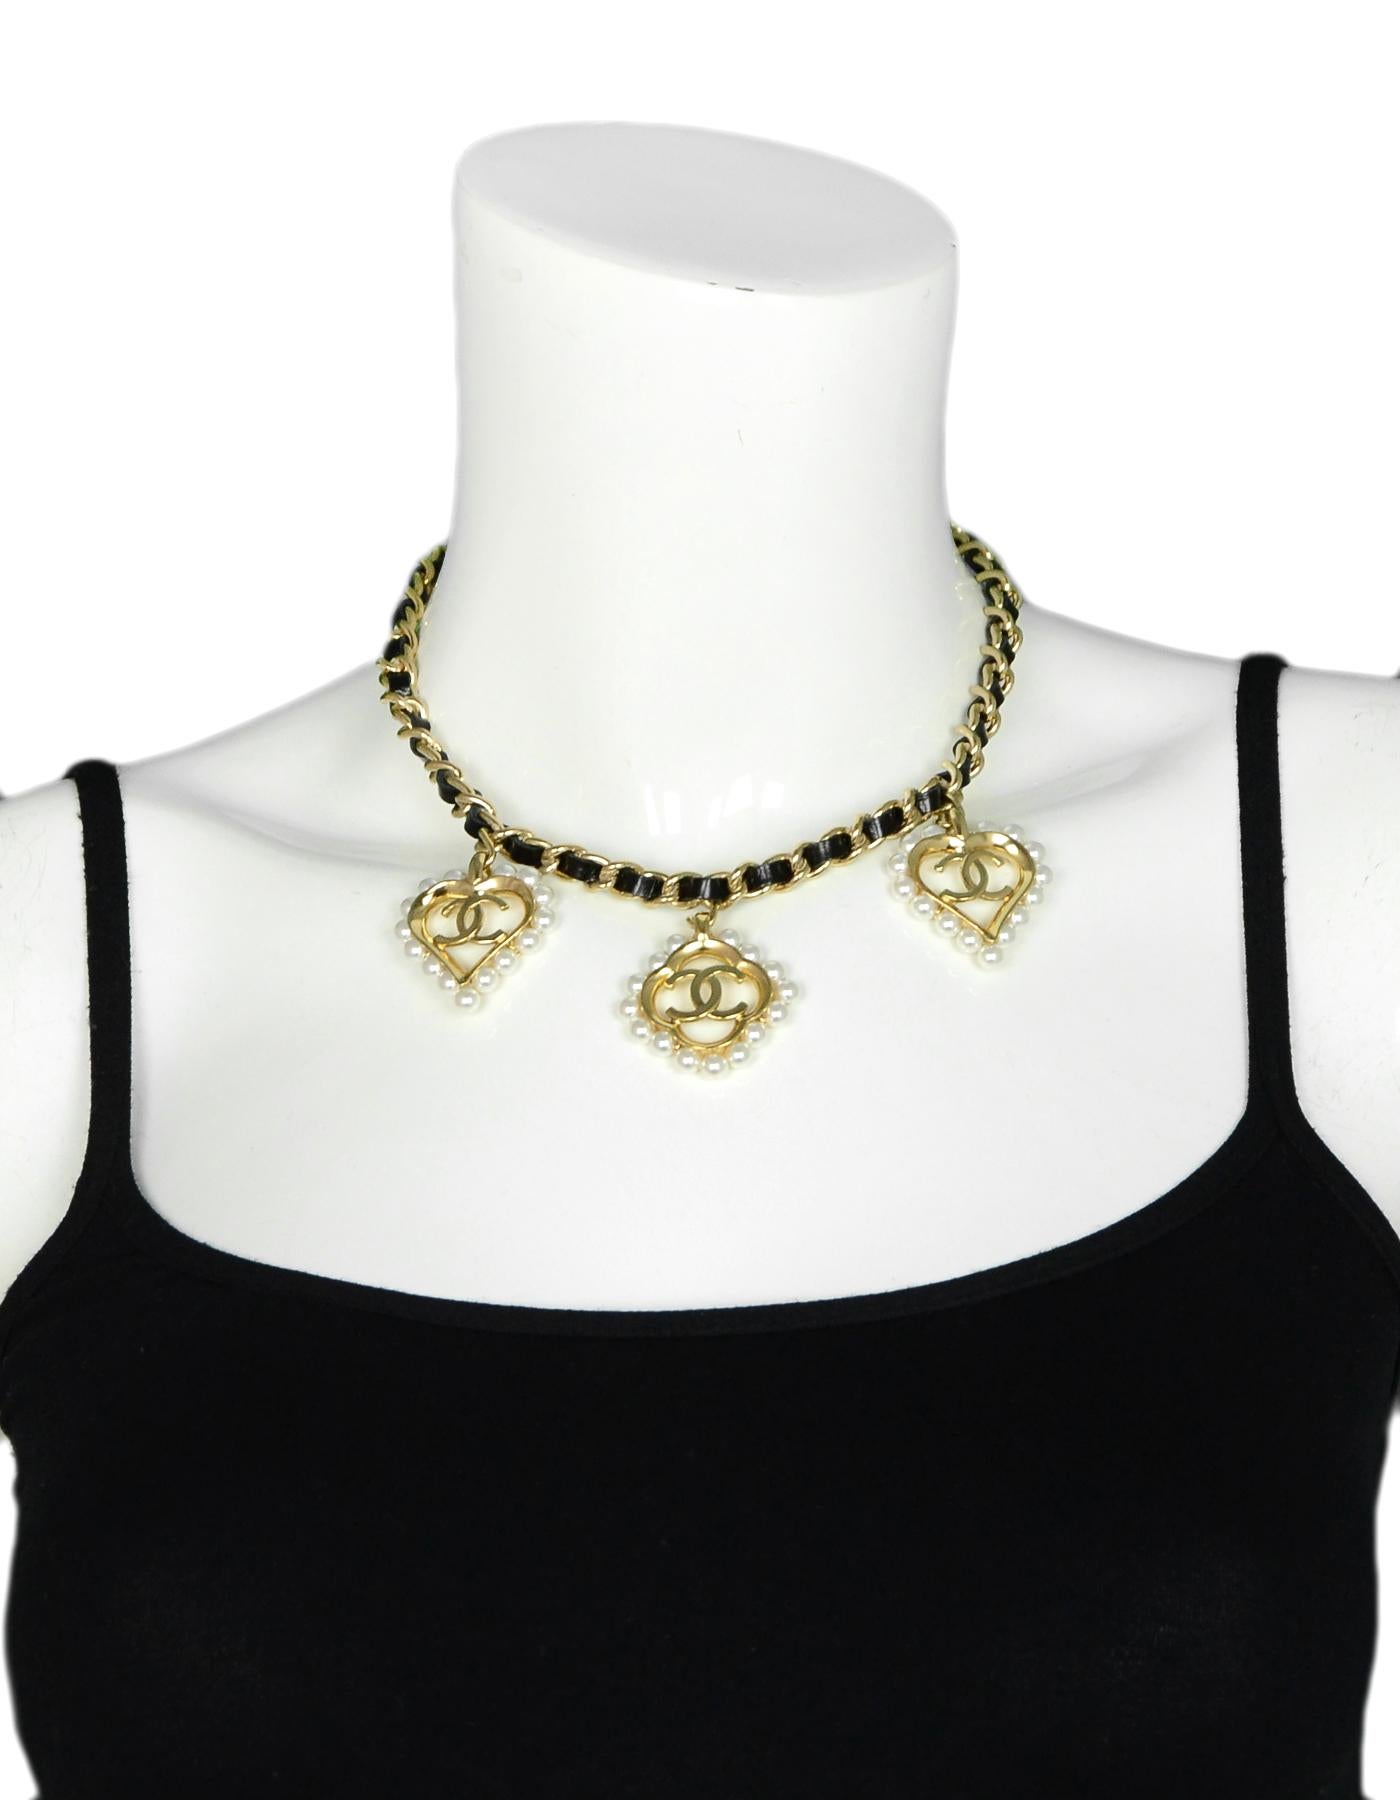 Chanel 2019 Leather Laced Chain Necklace w/ Faux Pearl Heart & Flower CC Charms

Made In: France
Year of Production: 2019
Color: Gold, Black
Materials: Metal, Leather, Pearls
Hallmarks: 